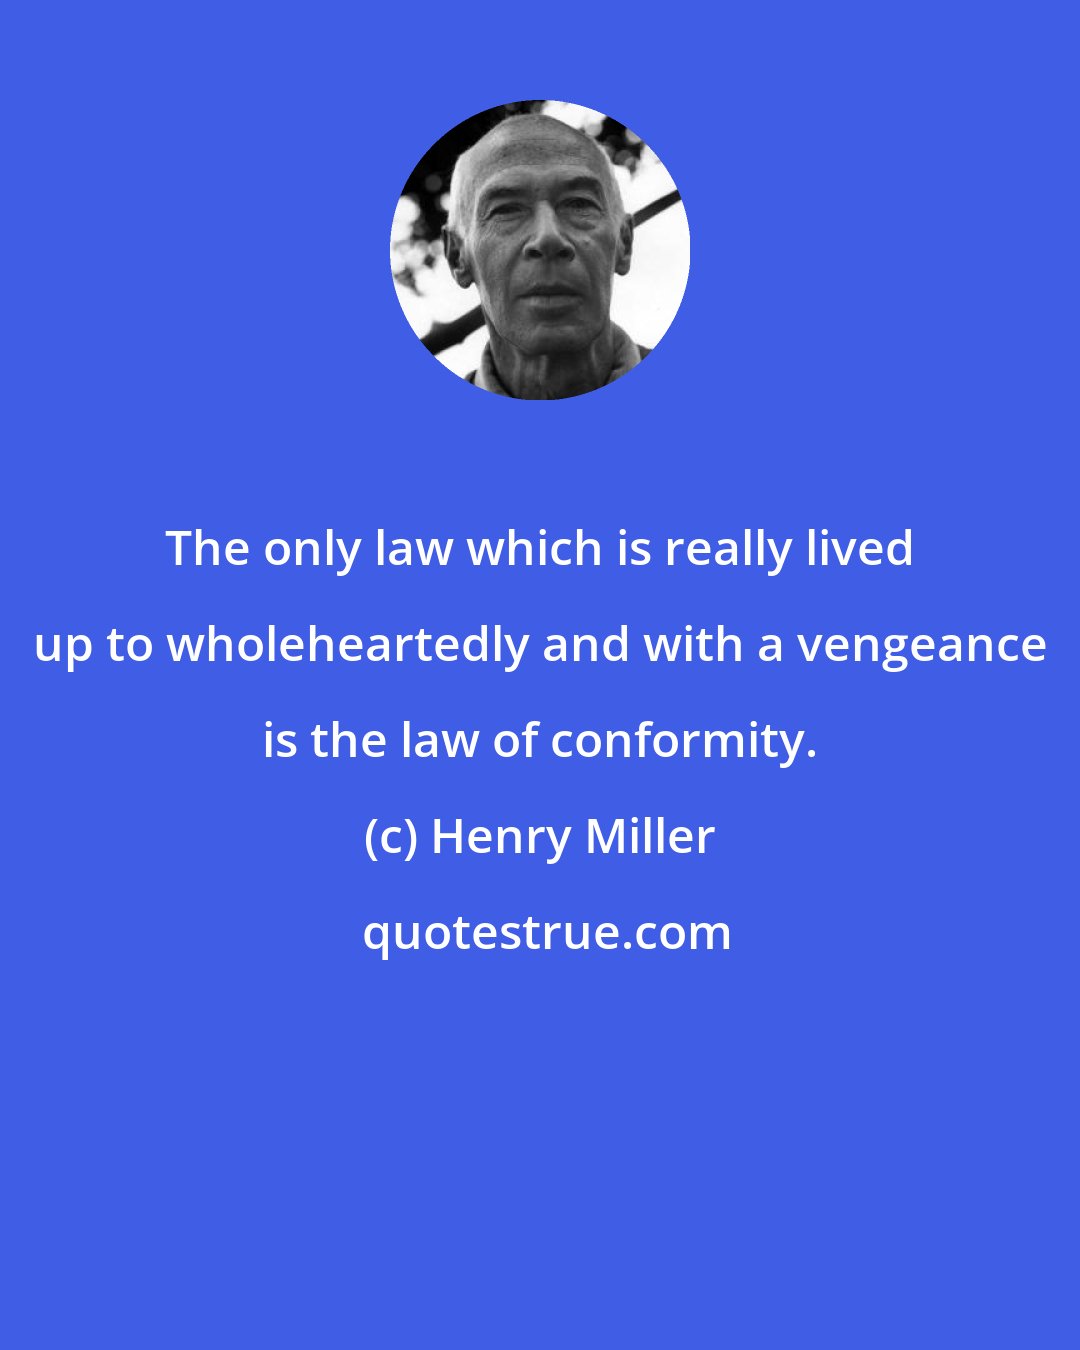 Henry Miller: The only law which is really lived up to wholeheartedly and with a vengeance is the law of conformity.